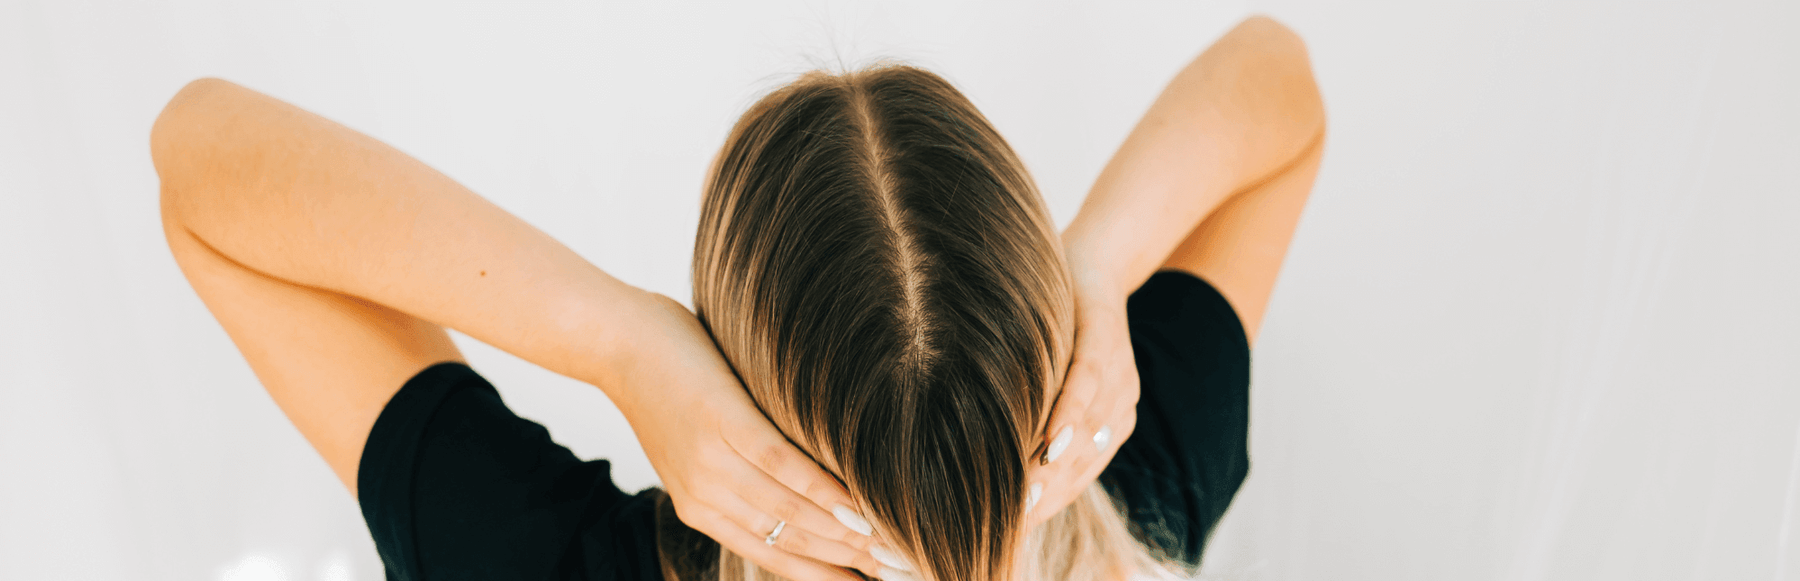 A Natural Approach to Combatting Dry Scalp